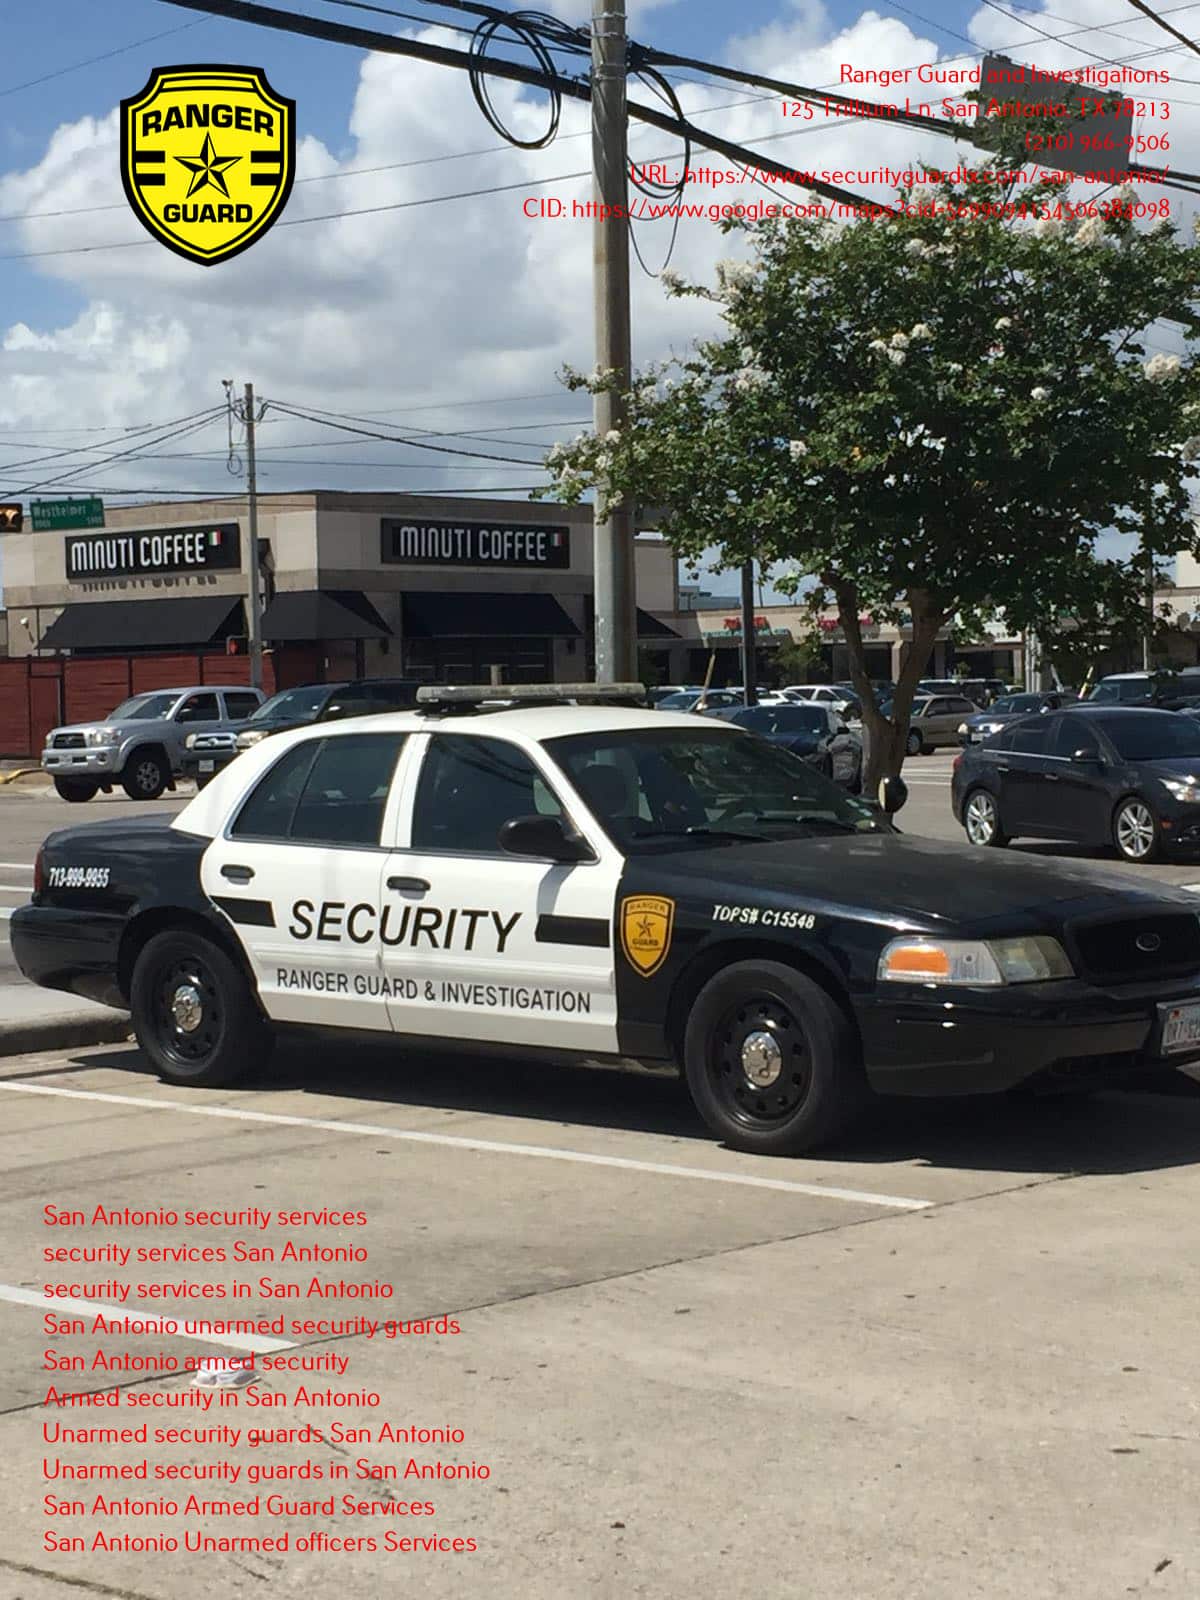 Ranger Guard and Investigations | Mobile Patrol Services in San Antonio, TX – An Asset to Business